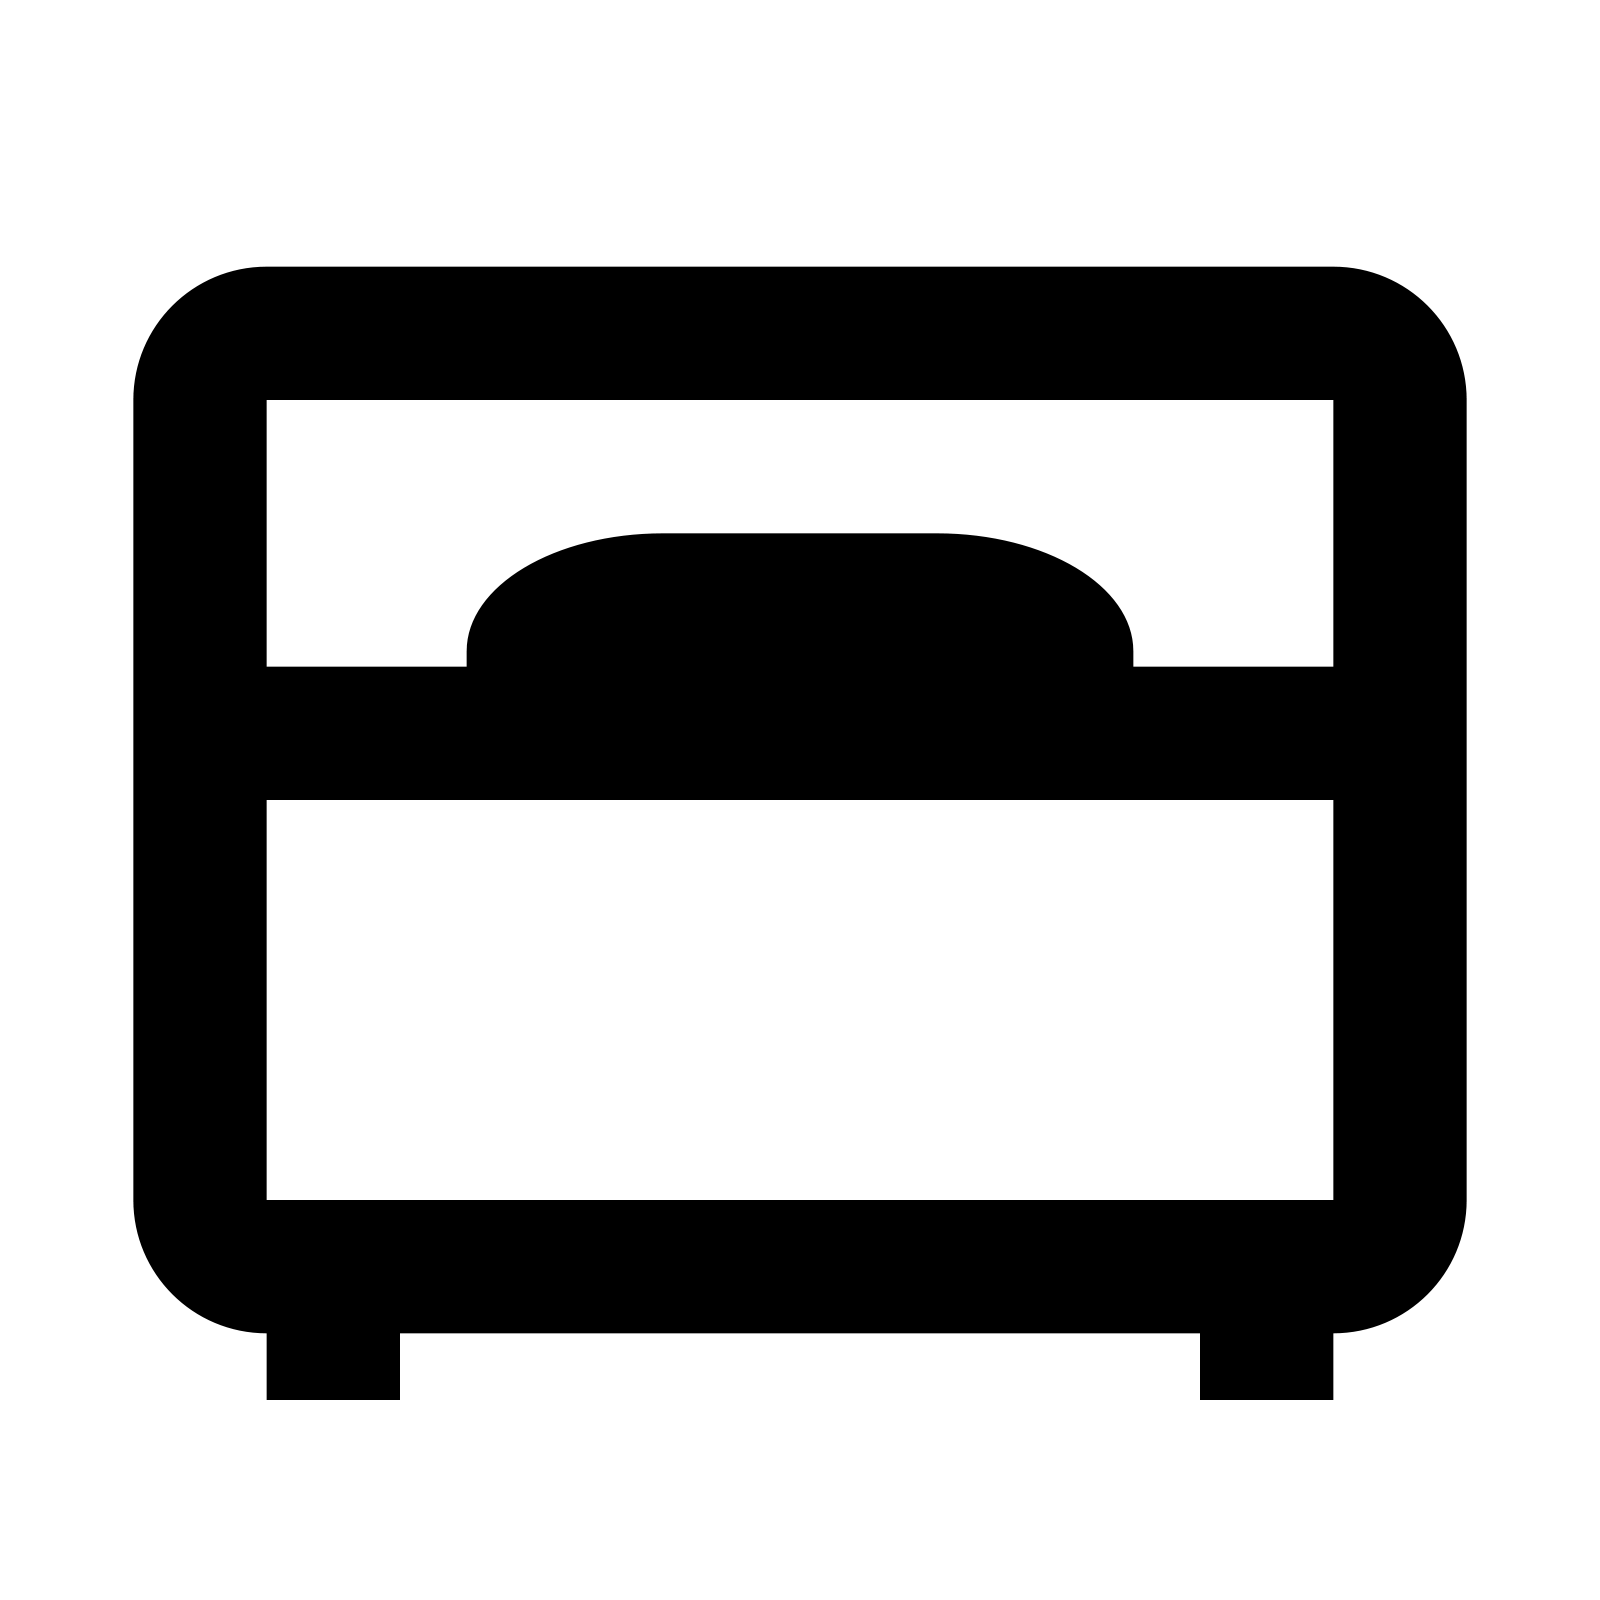 The Icon Single Bed Is Two Rectangles Sitting On Top Of Each Other. The Top. Png 50 Px - Lit Gratuit, Transparent background PNG HD thumbnail